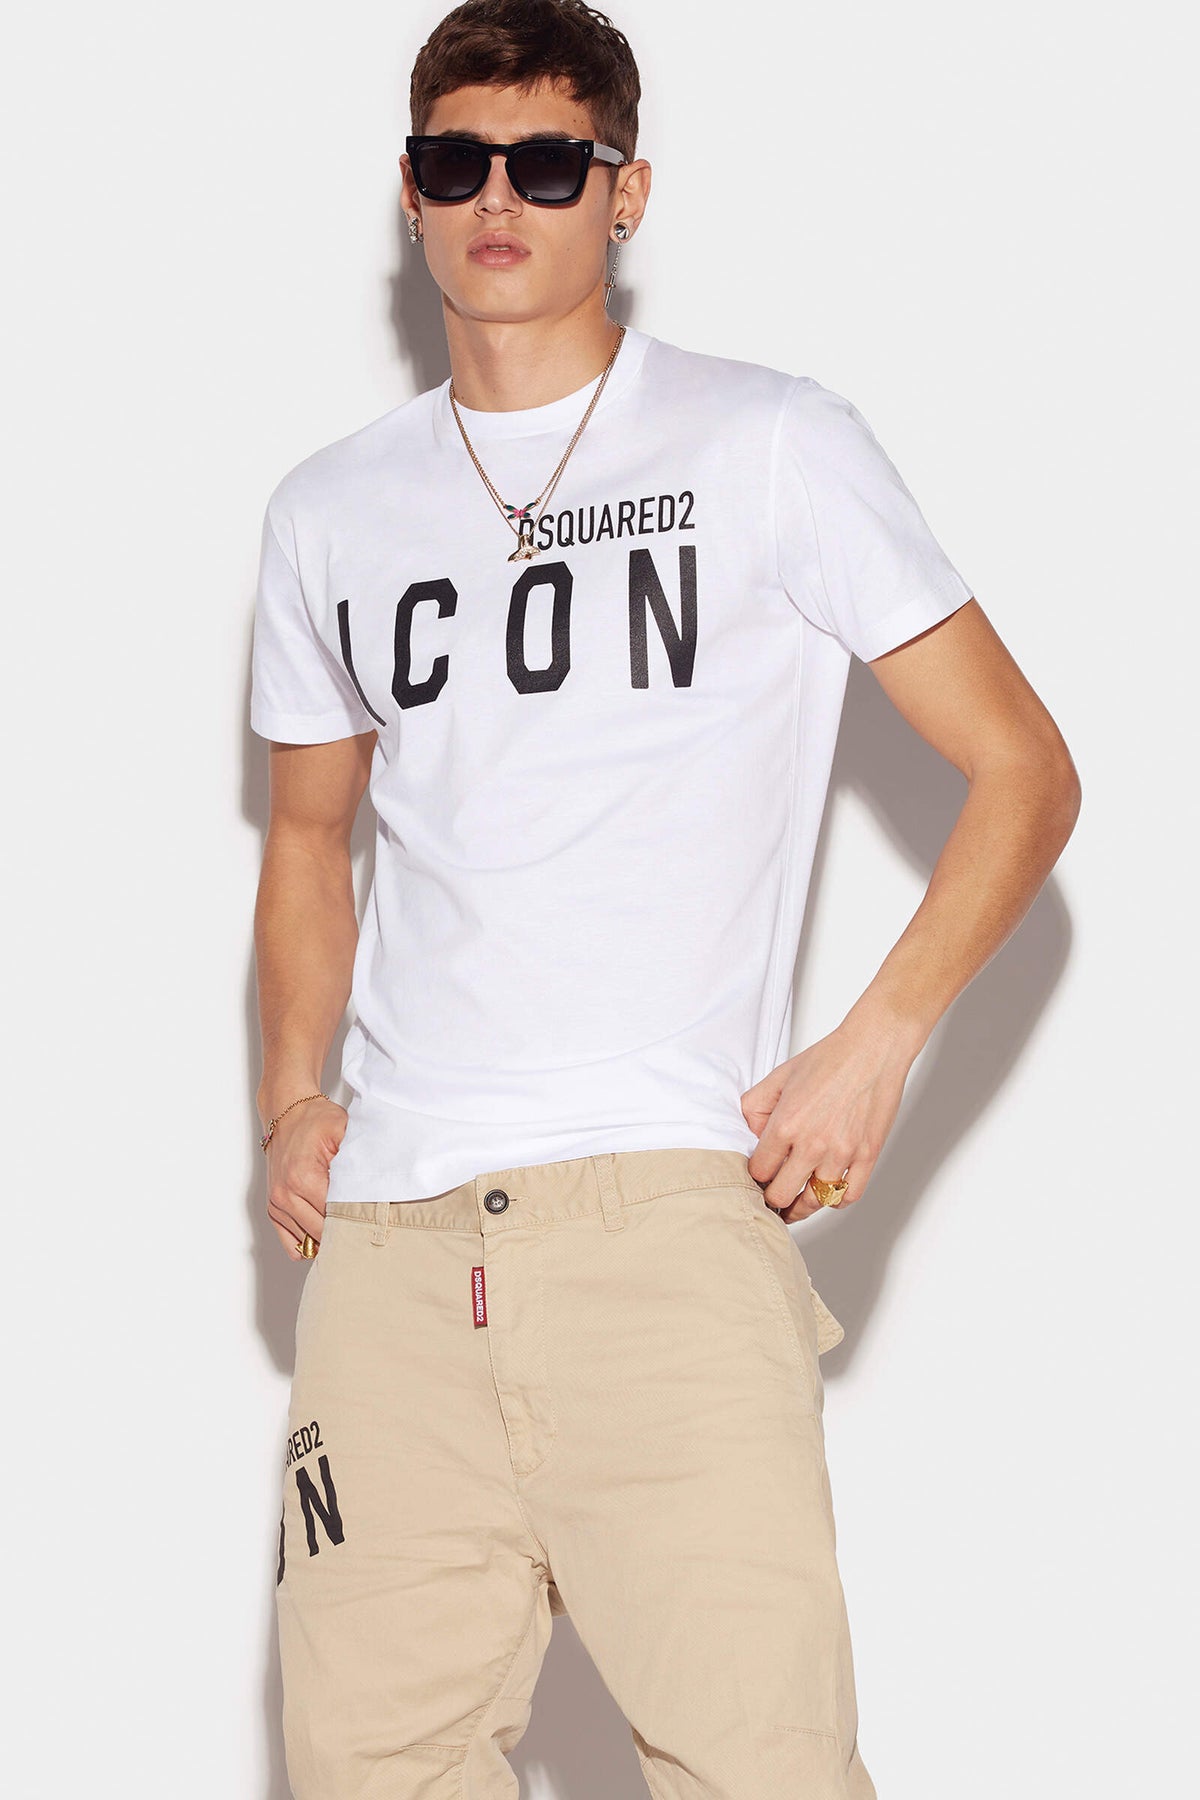 BE ICON COOL T-SHIRT